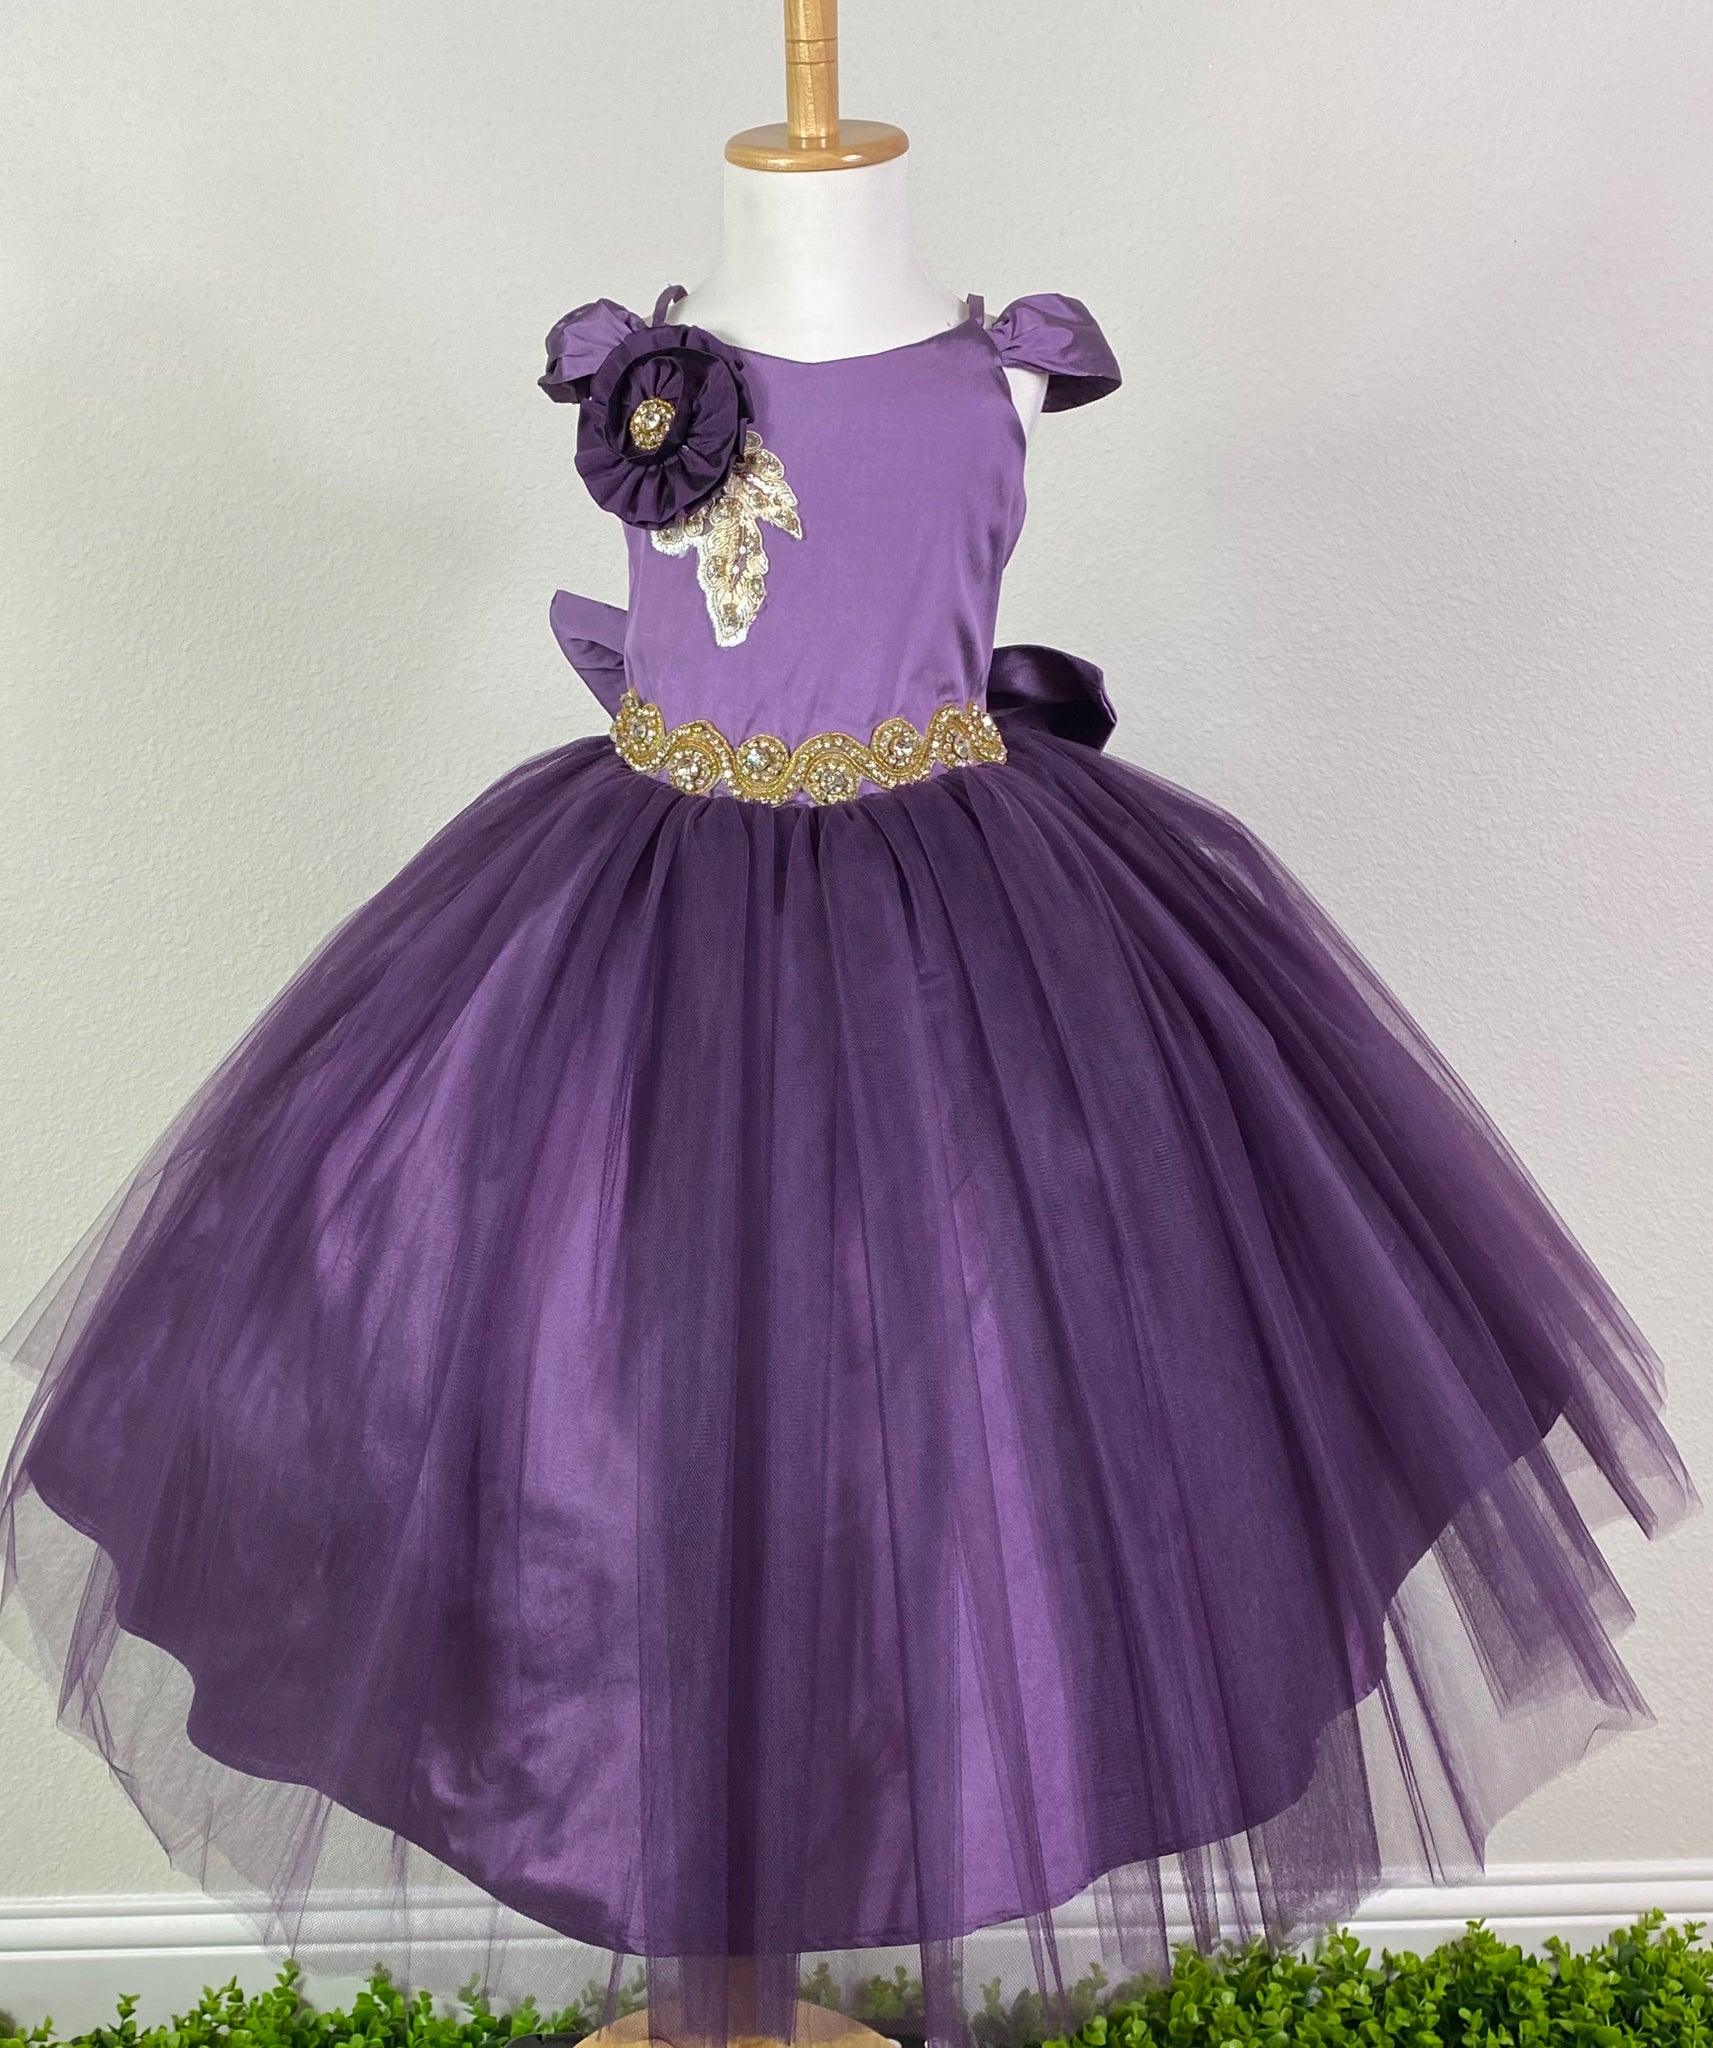 Satin bodice with off the shoulder cap sleeves Large flower on right shoulder Gold swirl rhinestone belting Satin skirting with tulle overlay Corset style backing Large satin bow on back Dress pictured with a petticoat Petticoat not included  Choose from a tulle, cloth, or wire for best look